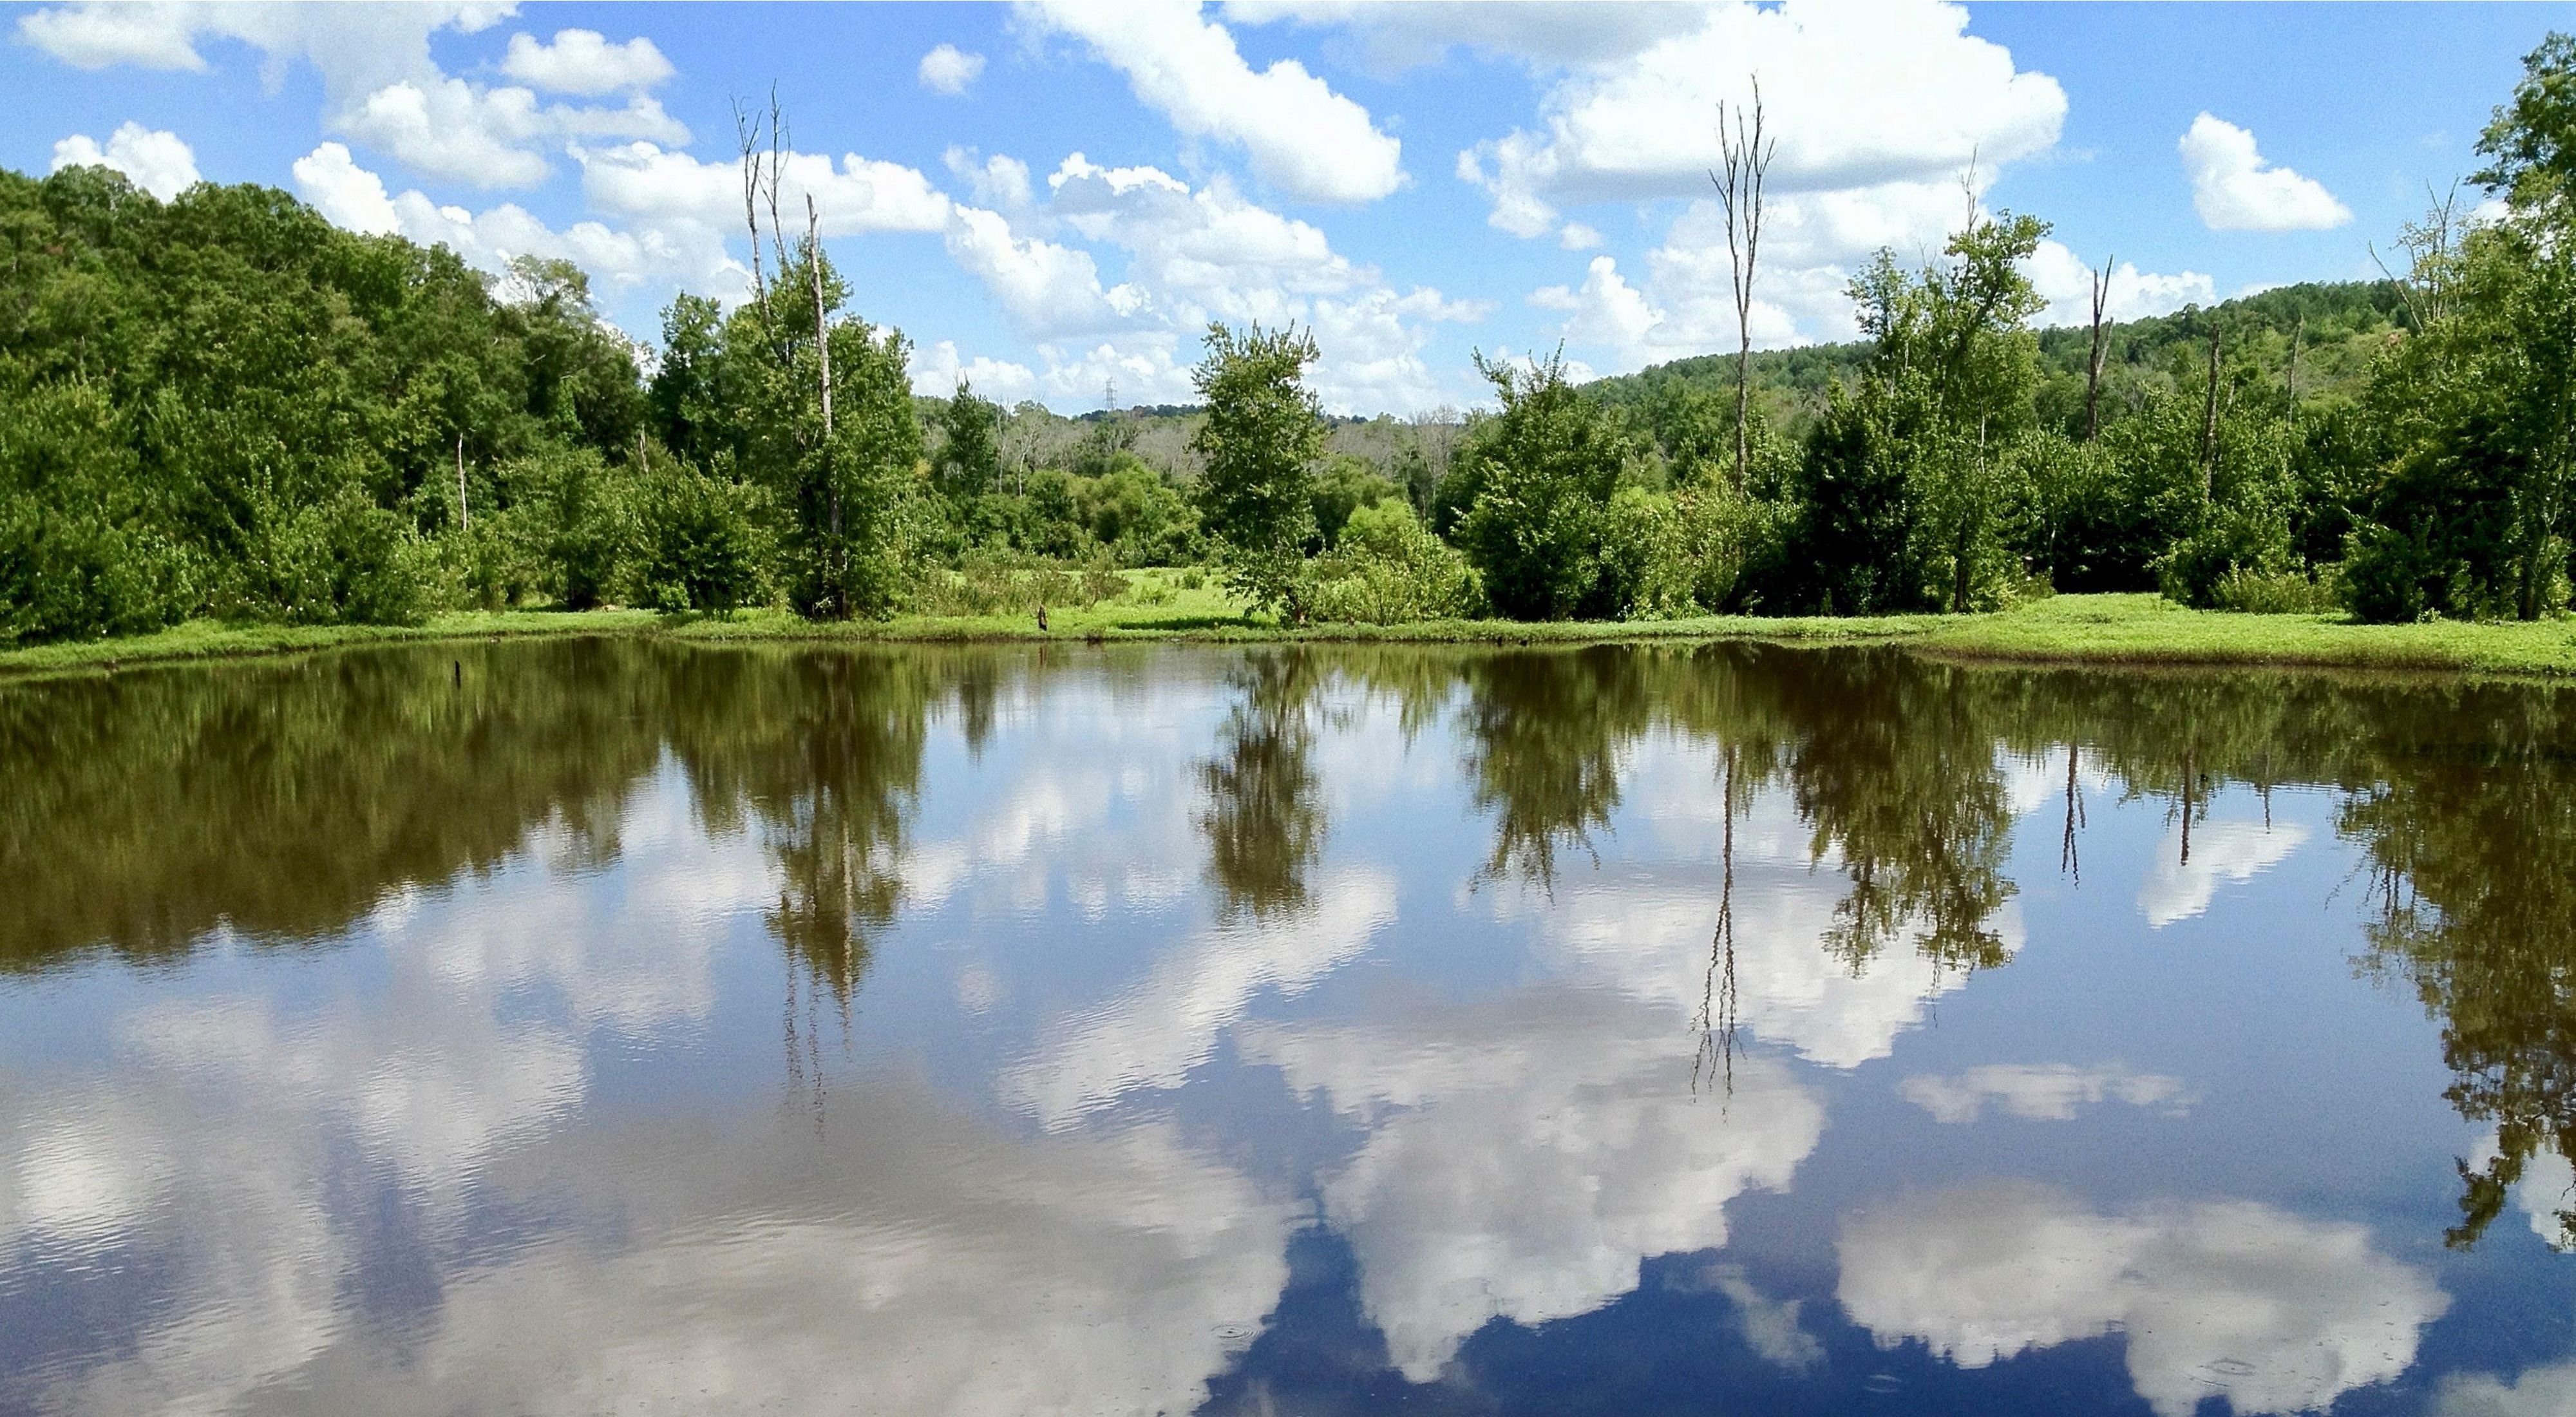 Trees along the shore of a lake and blue sky reflected in the flat water surface.